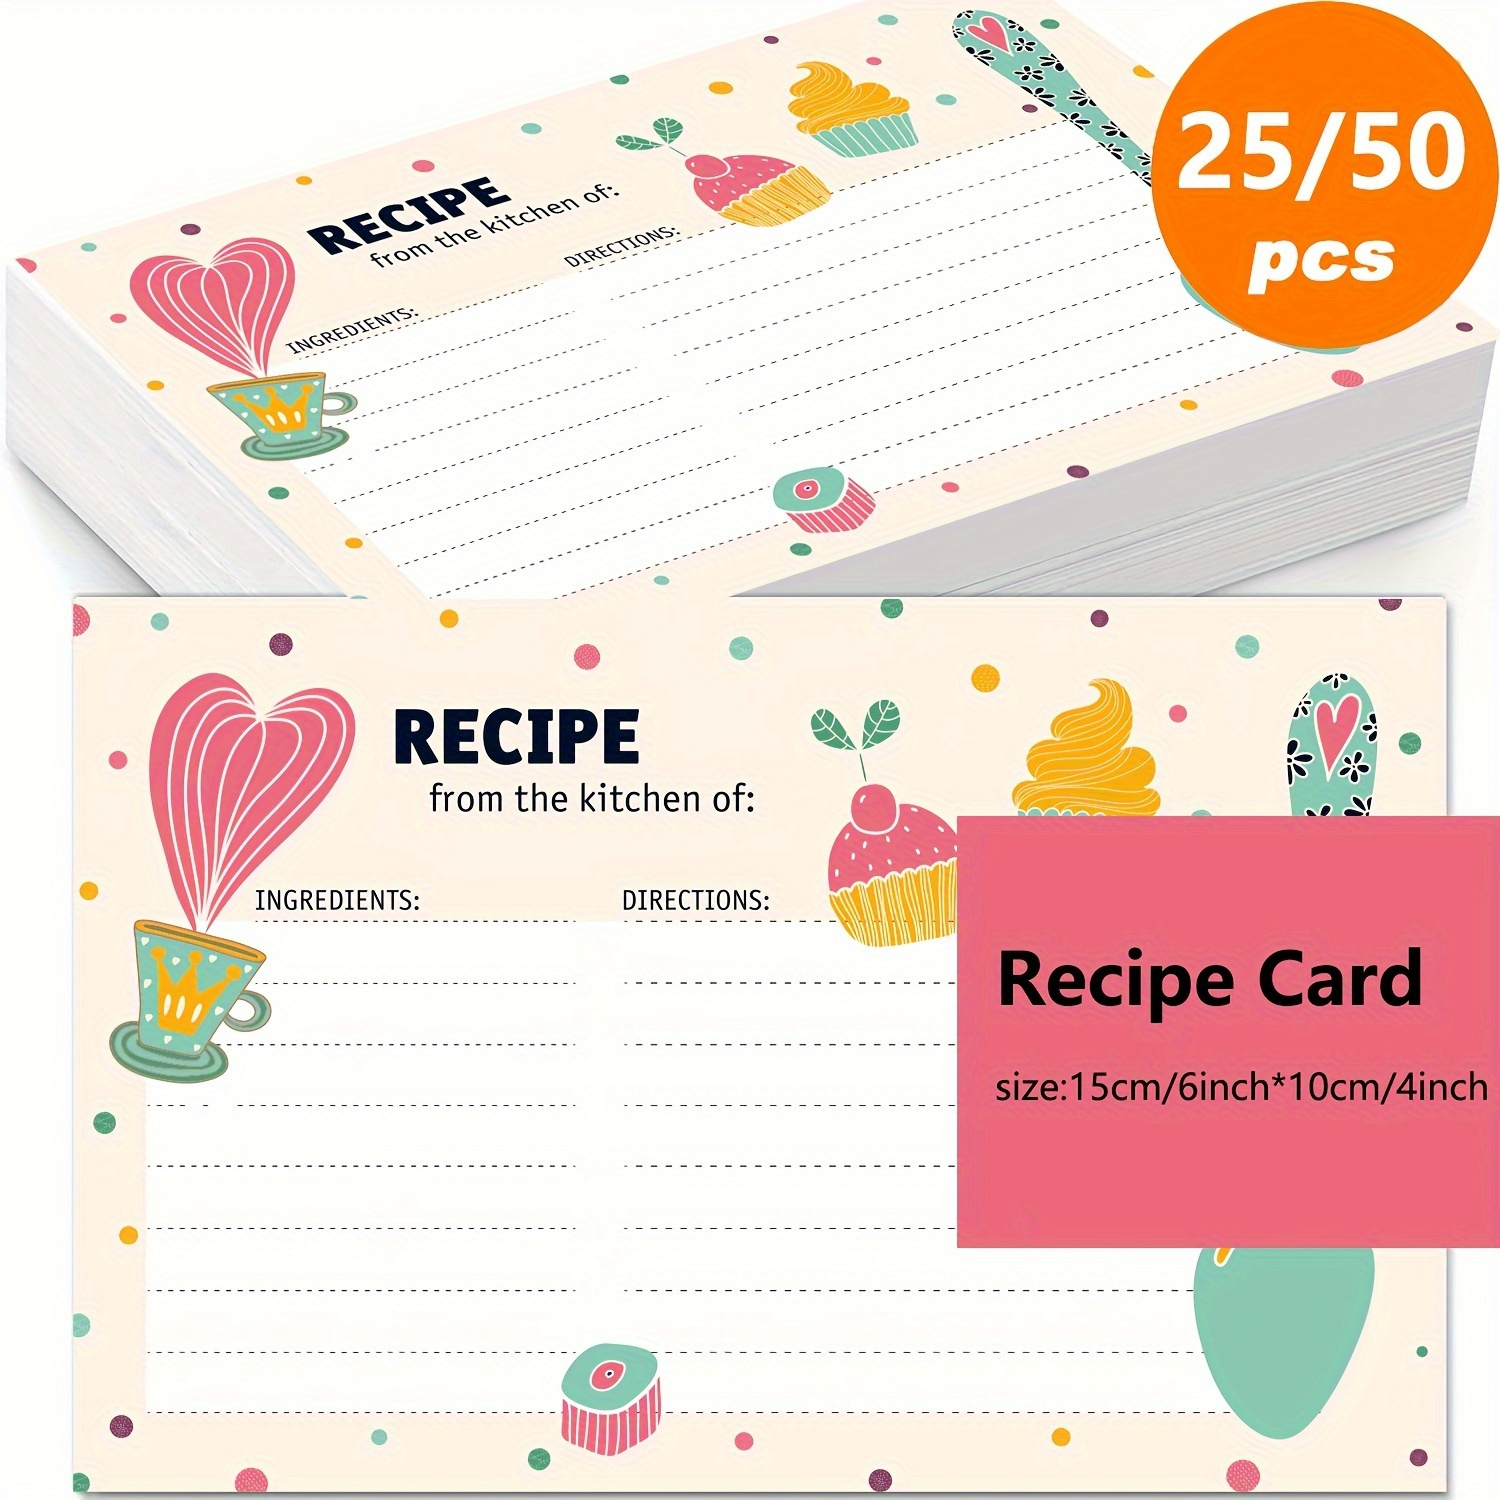 Jot & Mark Recipe Card Dividers, 24 Tabs per Set, Works with 4x6 Inch Cards,  Helps Organize Recipe Box (Classic)